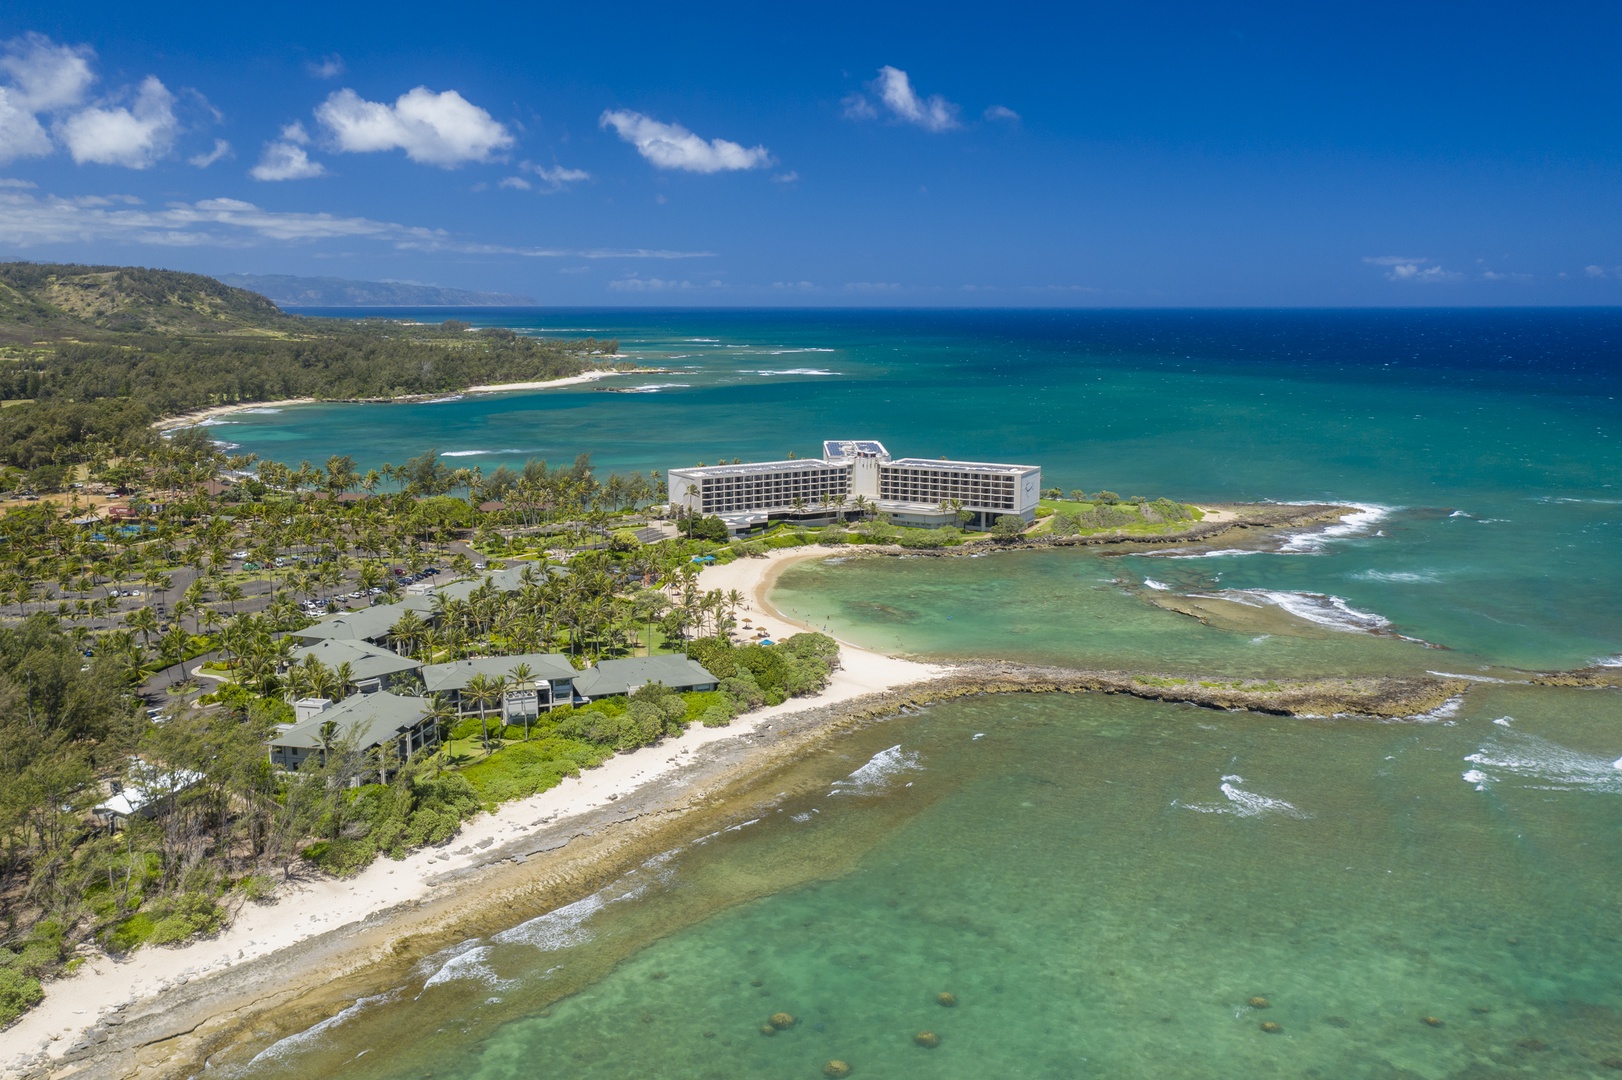 Kahuku Vacation Rentals, OFB Turtle Bay Villas 118 - Turtle Bay Resort with surrounding beaches and bays